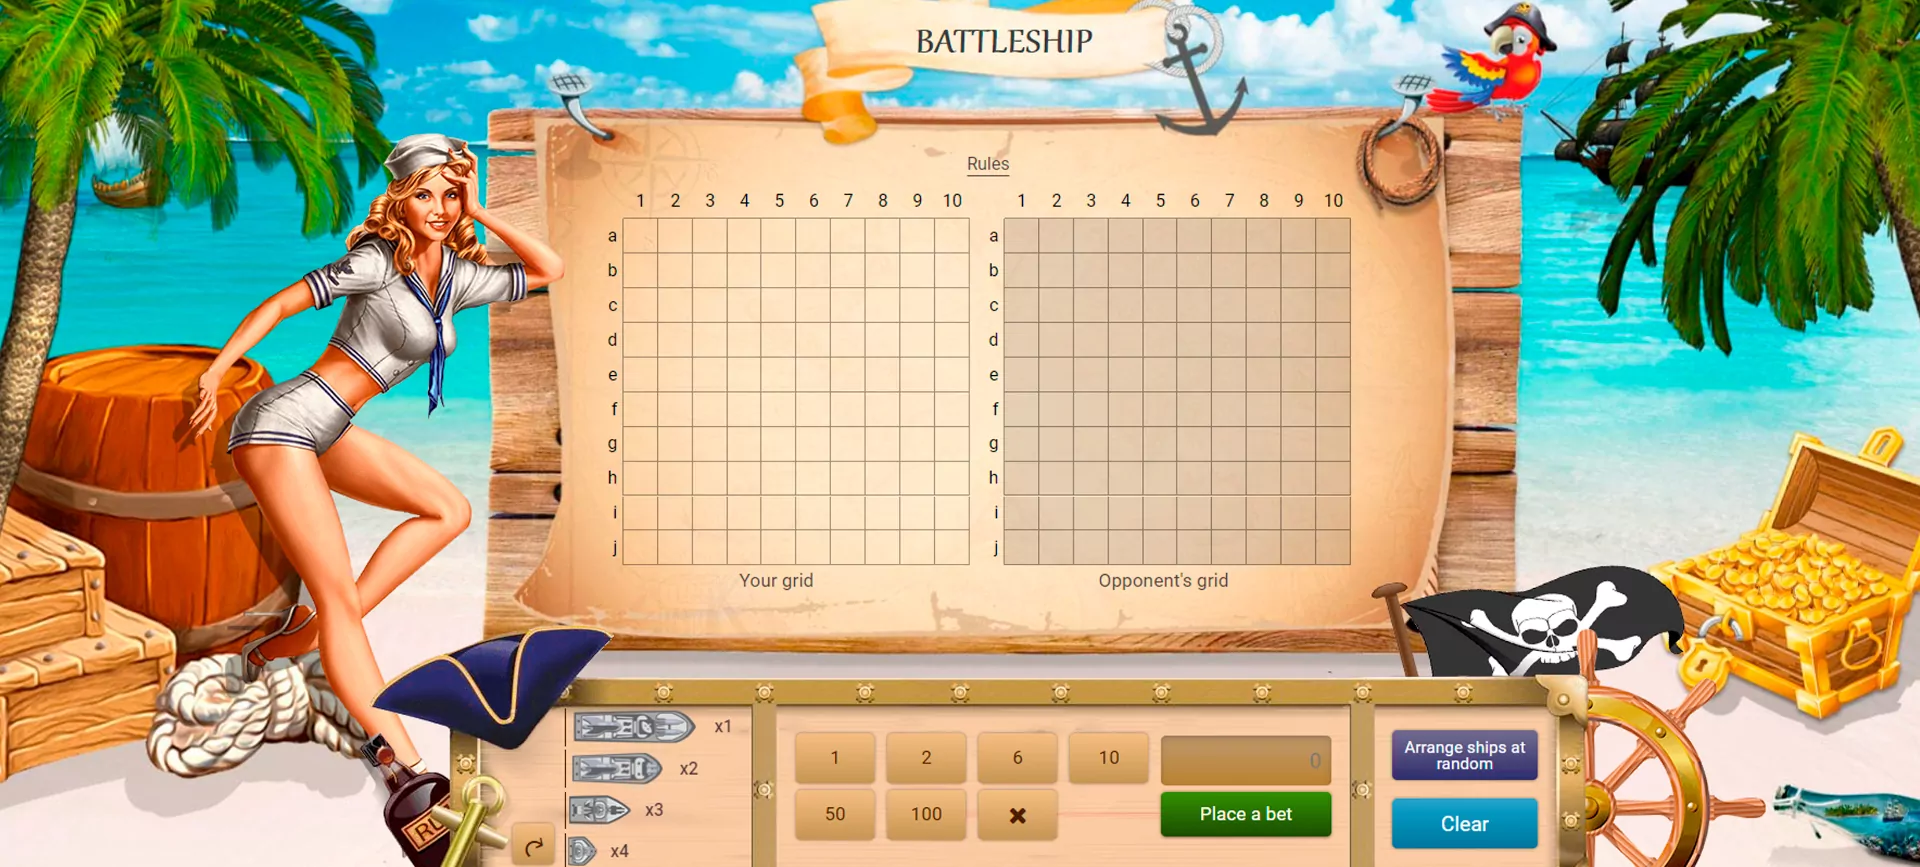 Play online in the Battleship game.